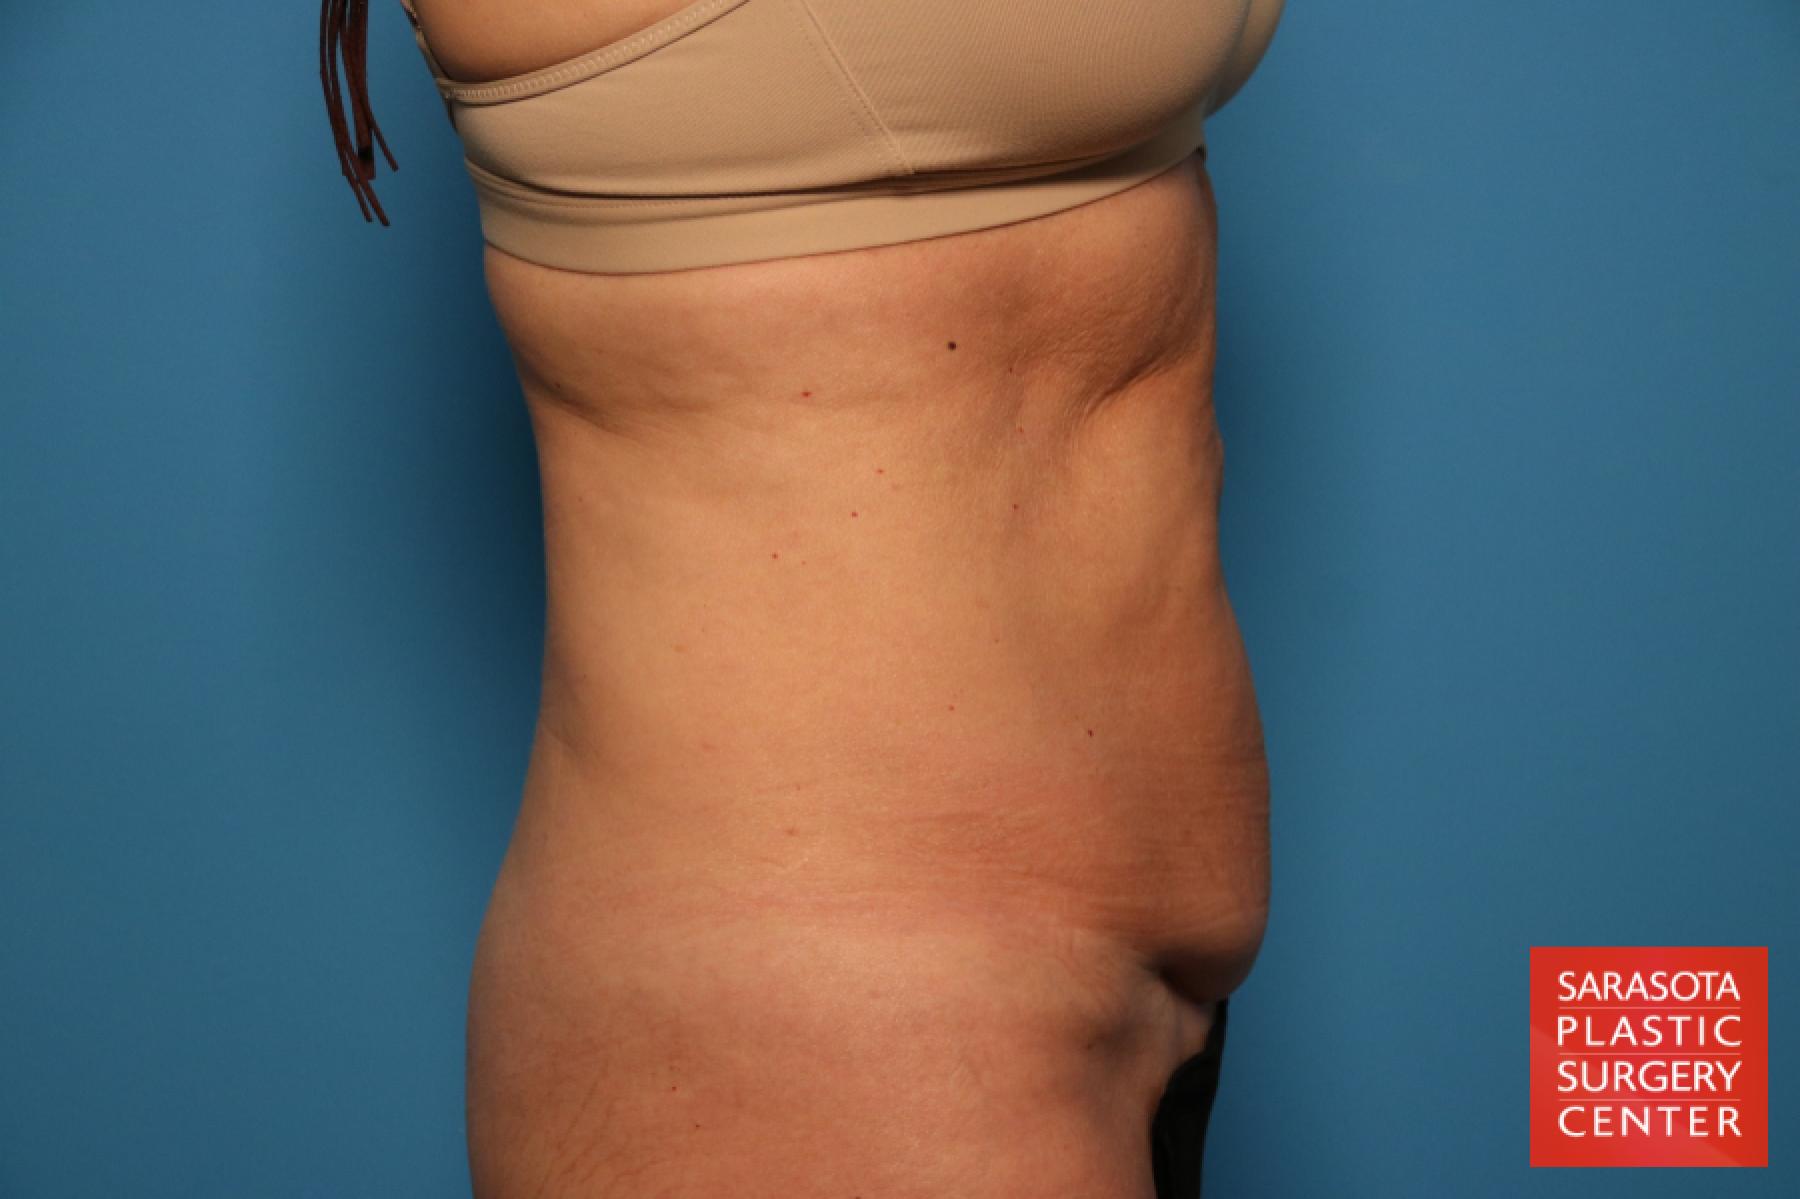 Mini Tummy Tuck: Patient 1 - Before and After 3